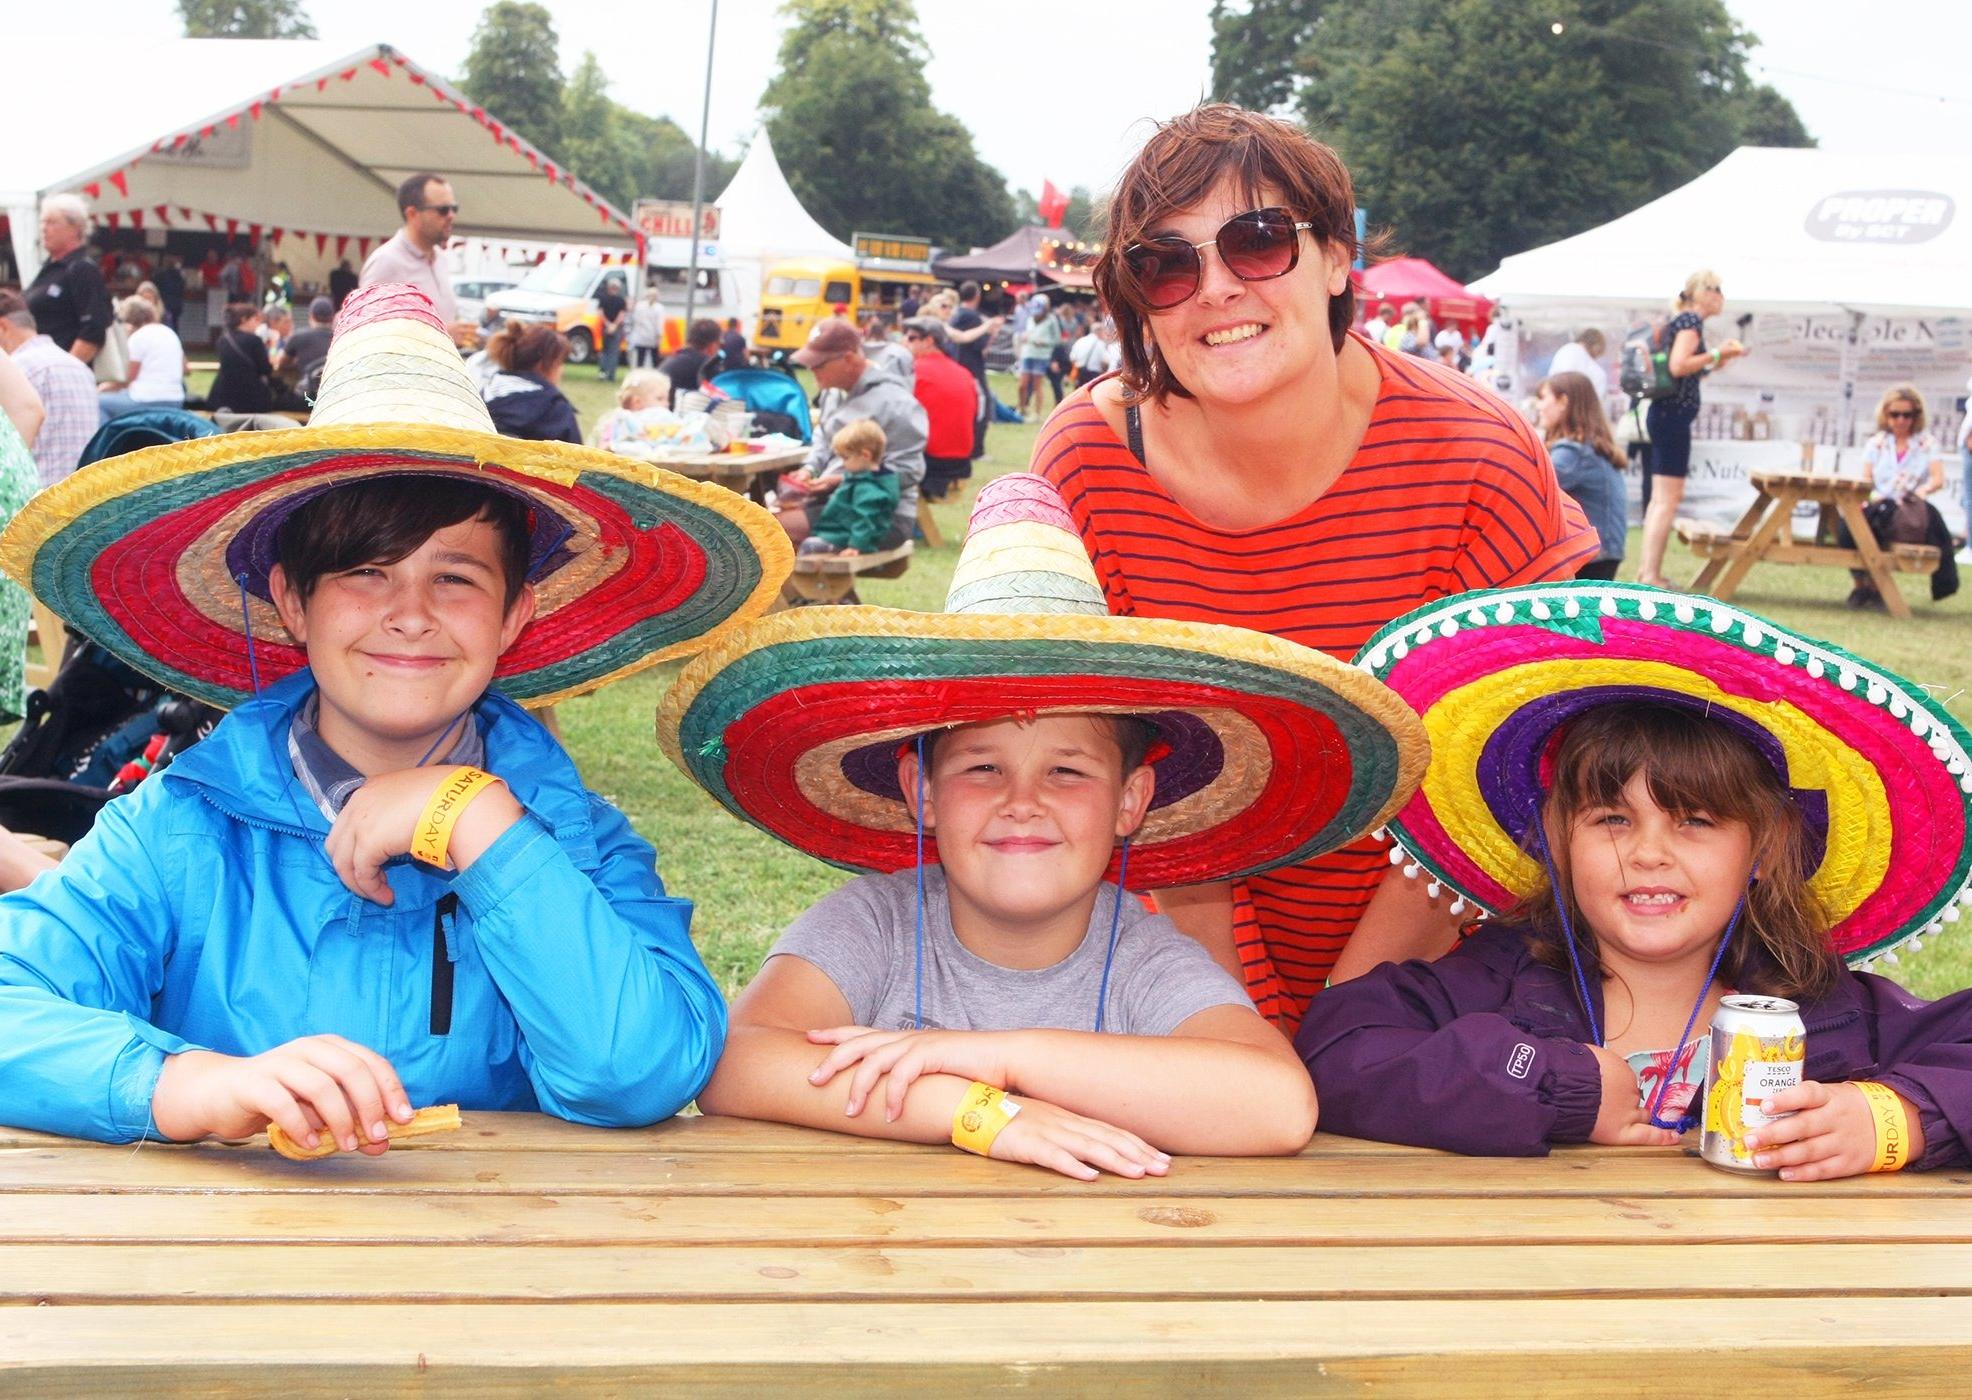 A new Summer Arts Series is planned to take place aty West Dean Gardens in August, replacing the Chilli Fiesta